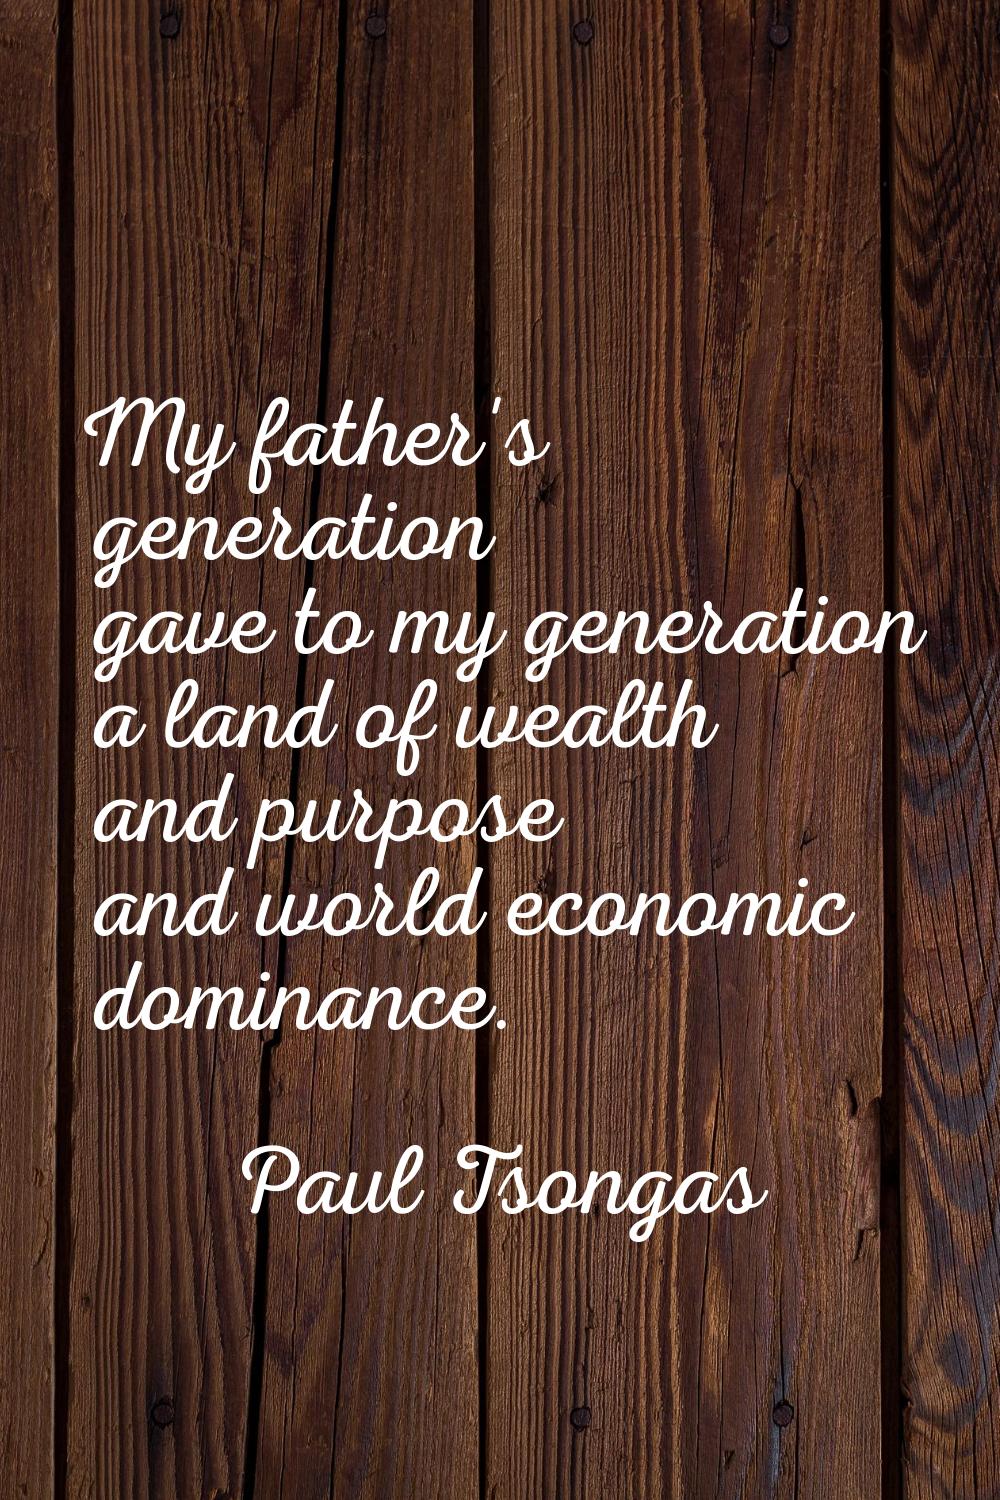 My father's generation gave to my generation a land of wealth and purpose and world economic domina